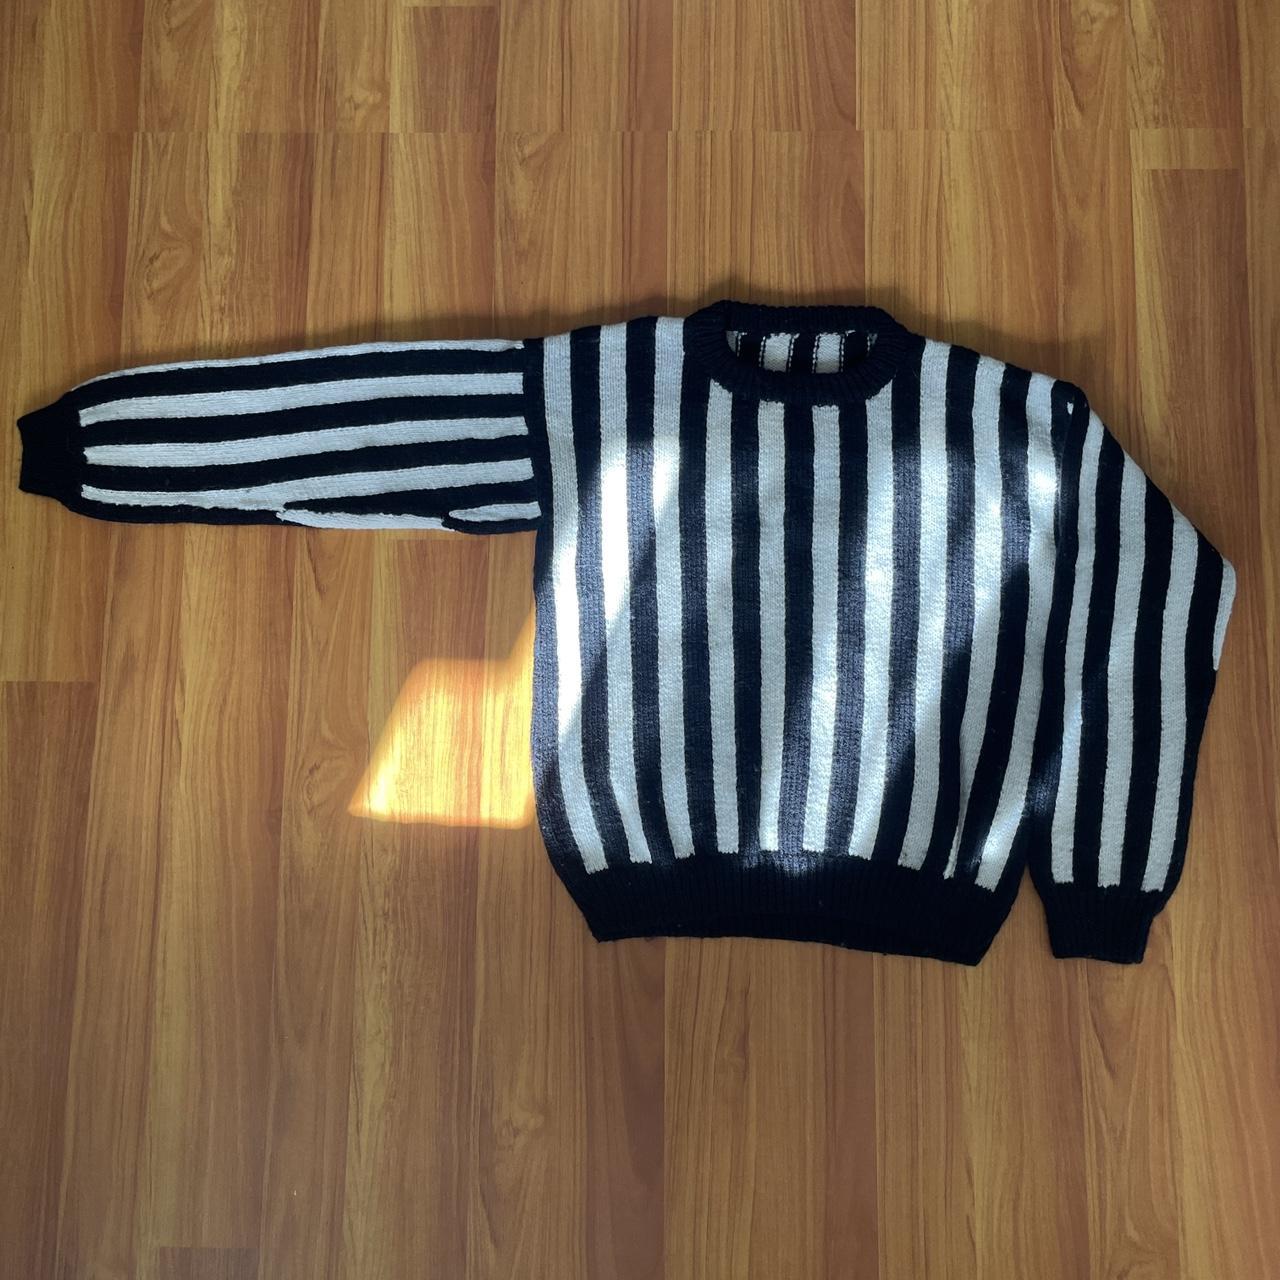 Chunky oversized black and white striped... - Depop